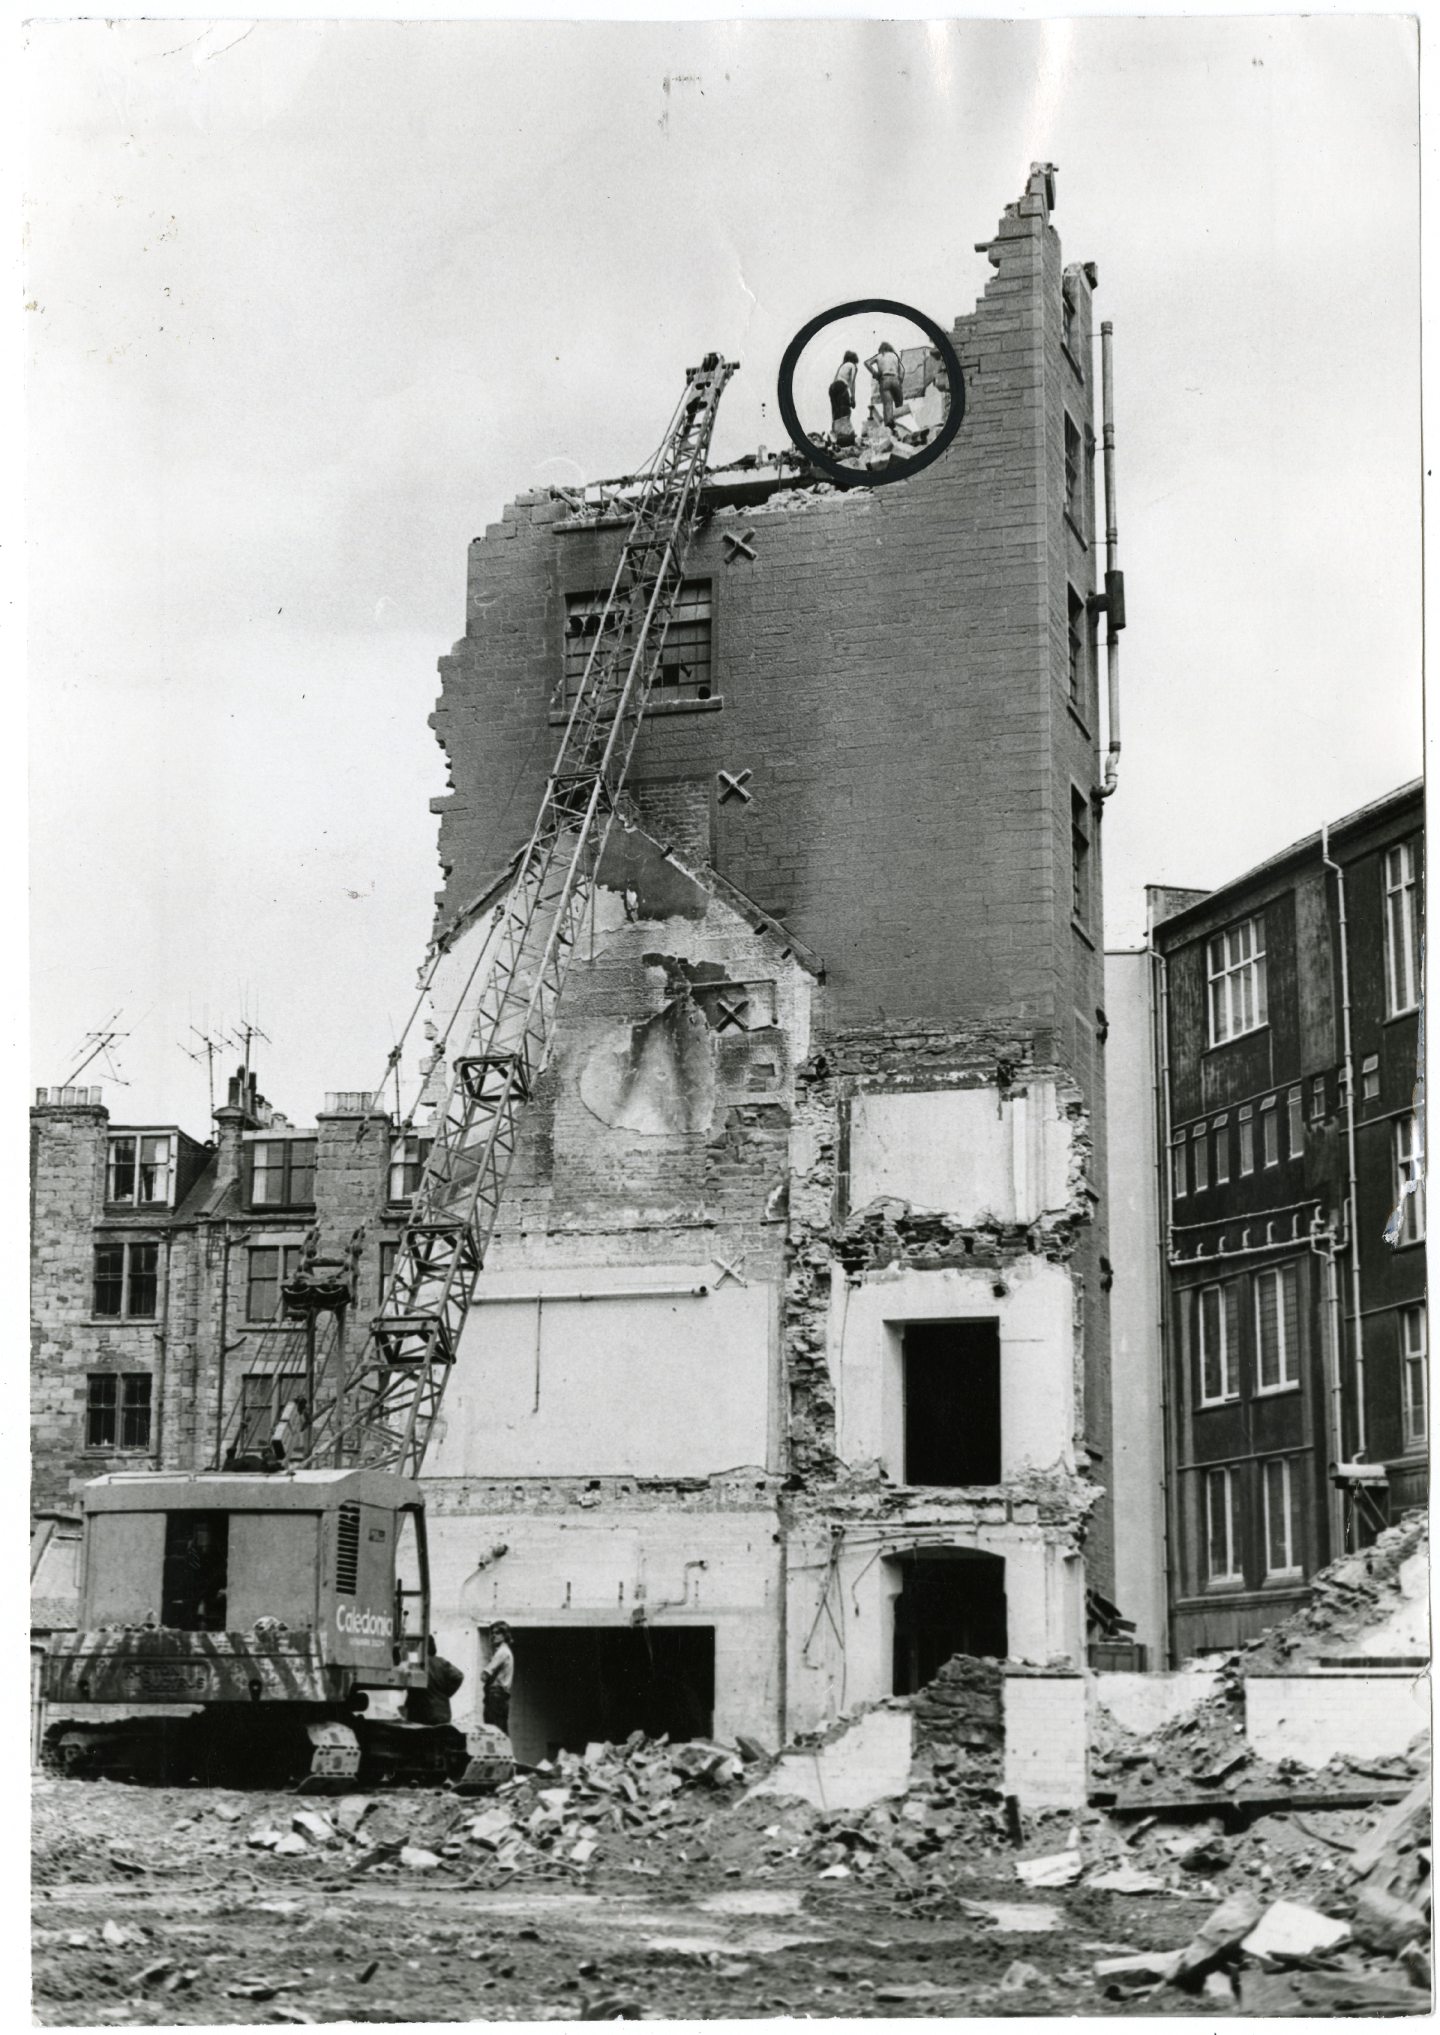 Circled in the picture are workers perched atop a building during the operation in August 1978. Image: DC Thomson.